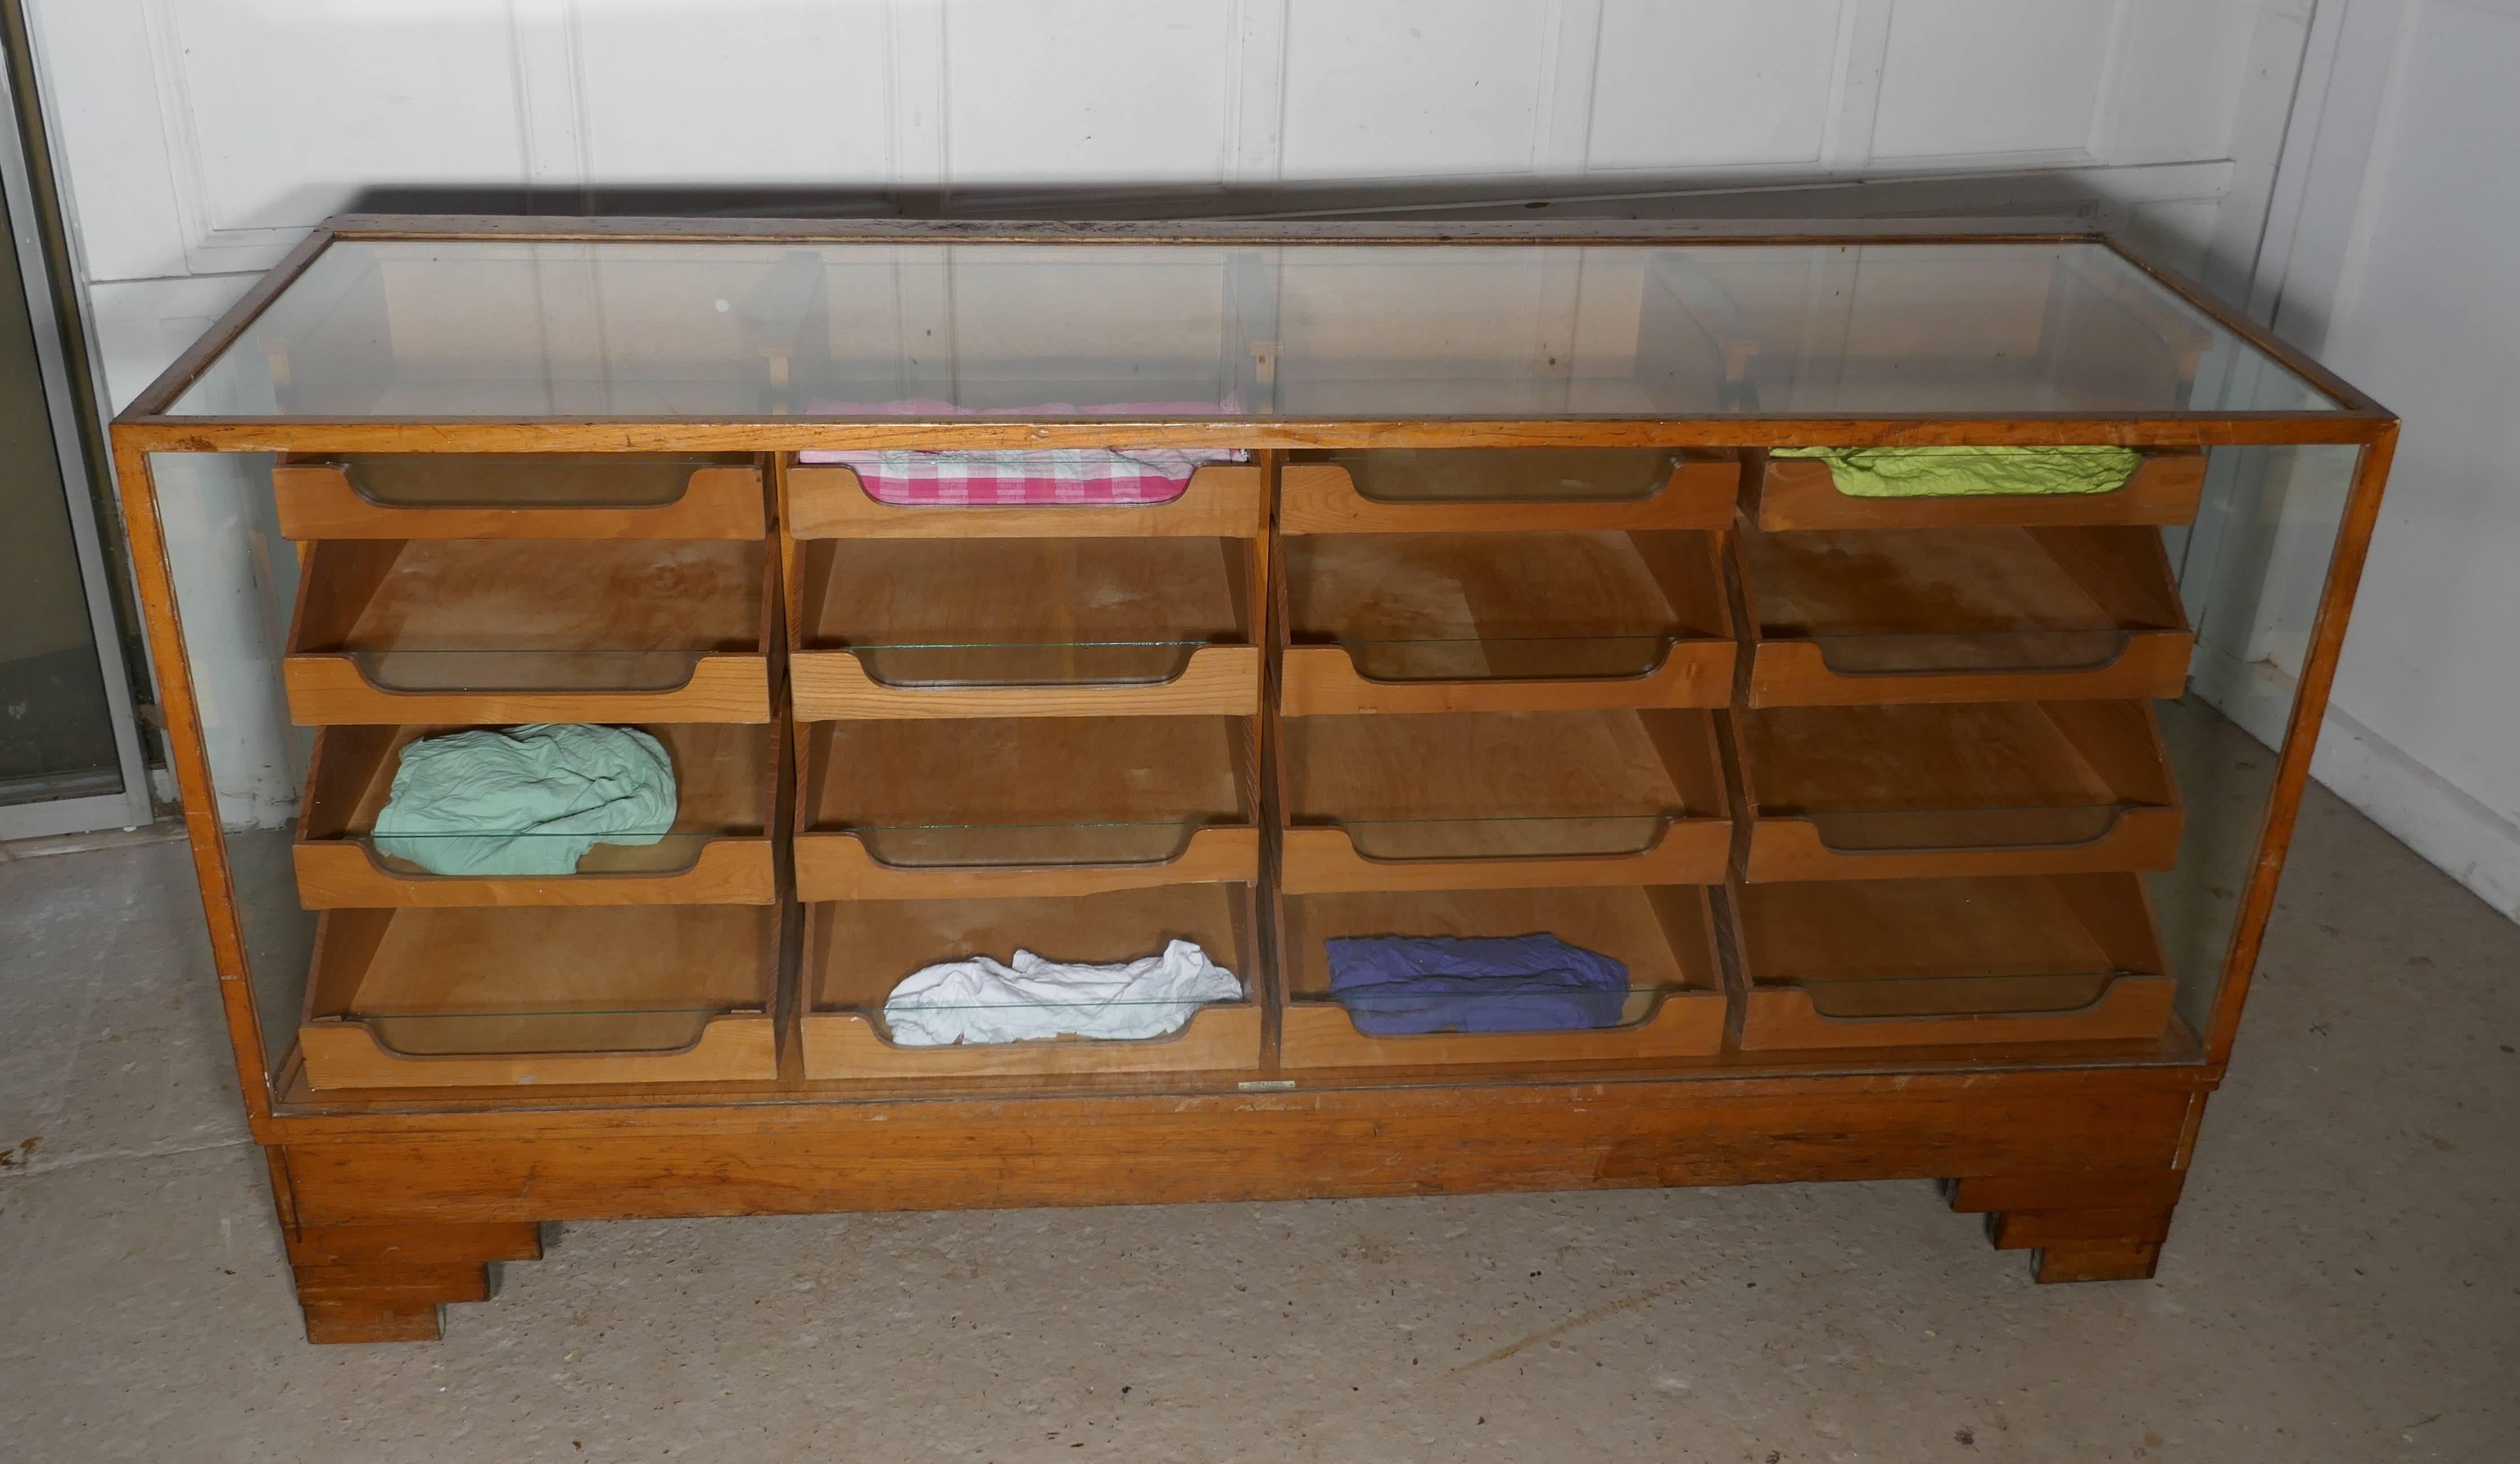 This haberdashery shop counter is a good large size, it has 4 banks each of 4 graduated drawers with moulded wooden handles, the fronts of the drawers have a glass insert to give good viewing of the contents. 
The cabinet is made in golden Oak,